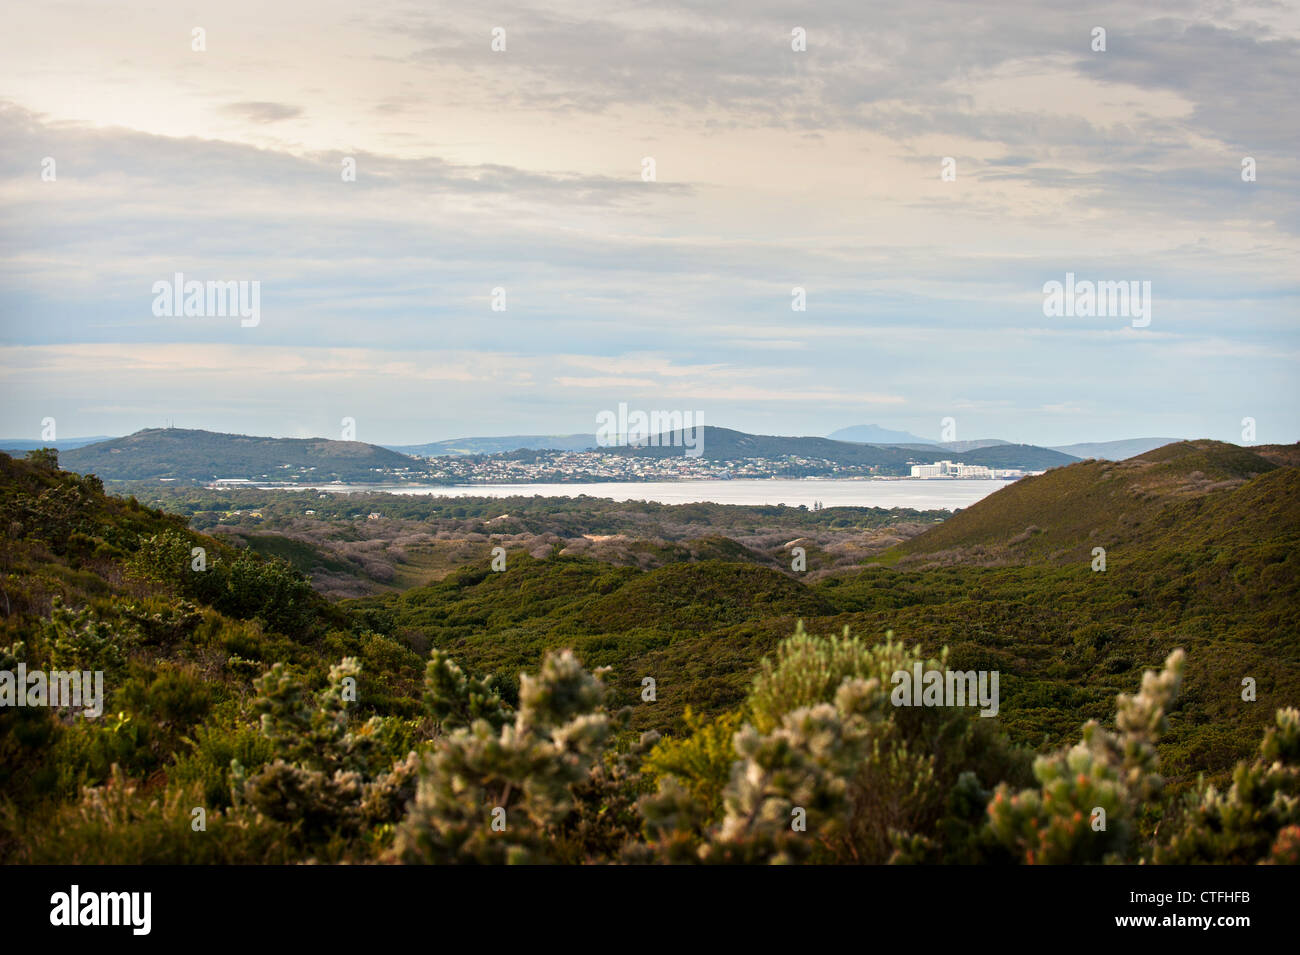 The city of Albany and Princess Royal Harbour in Western Australia Stock Photo